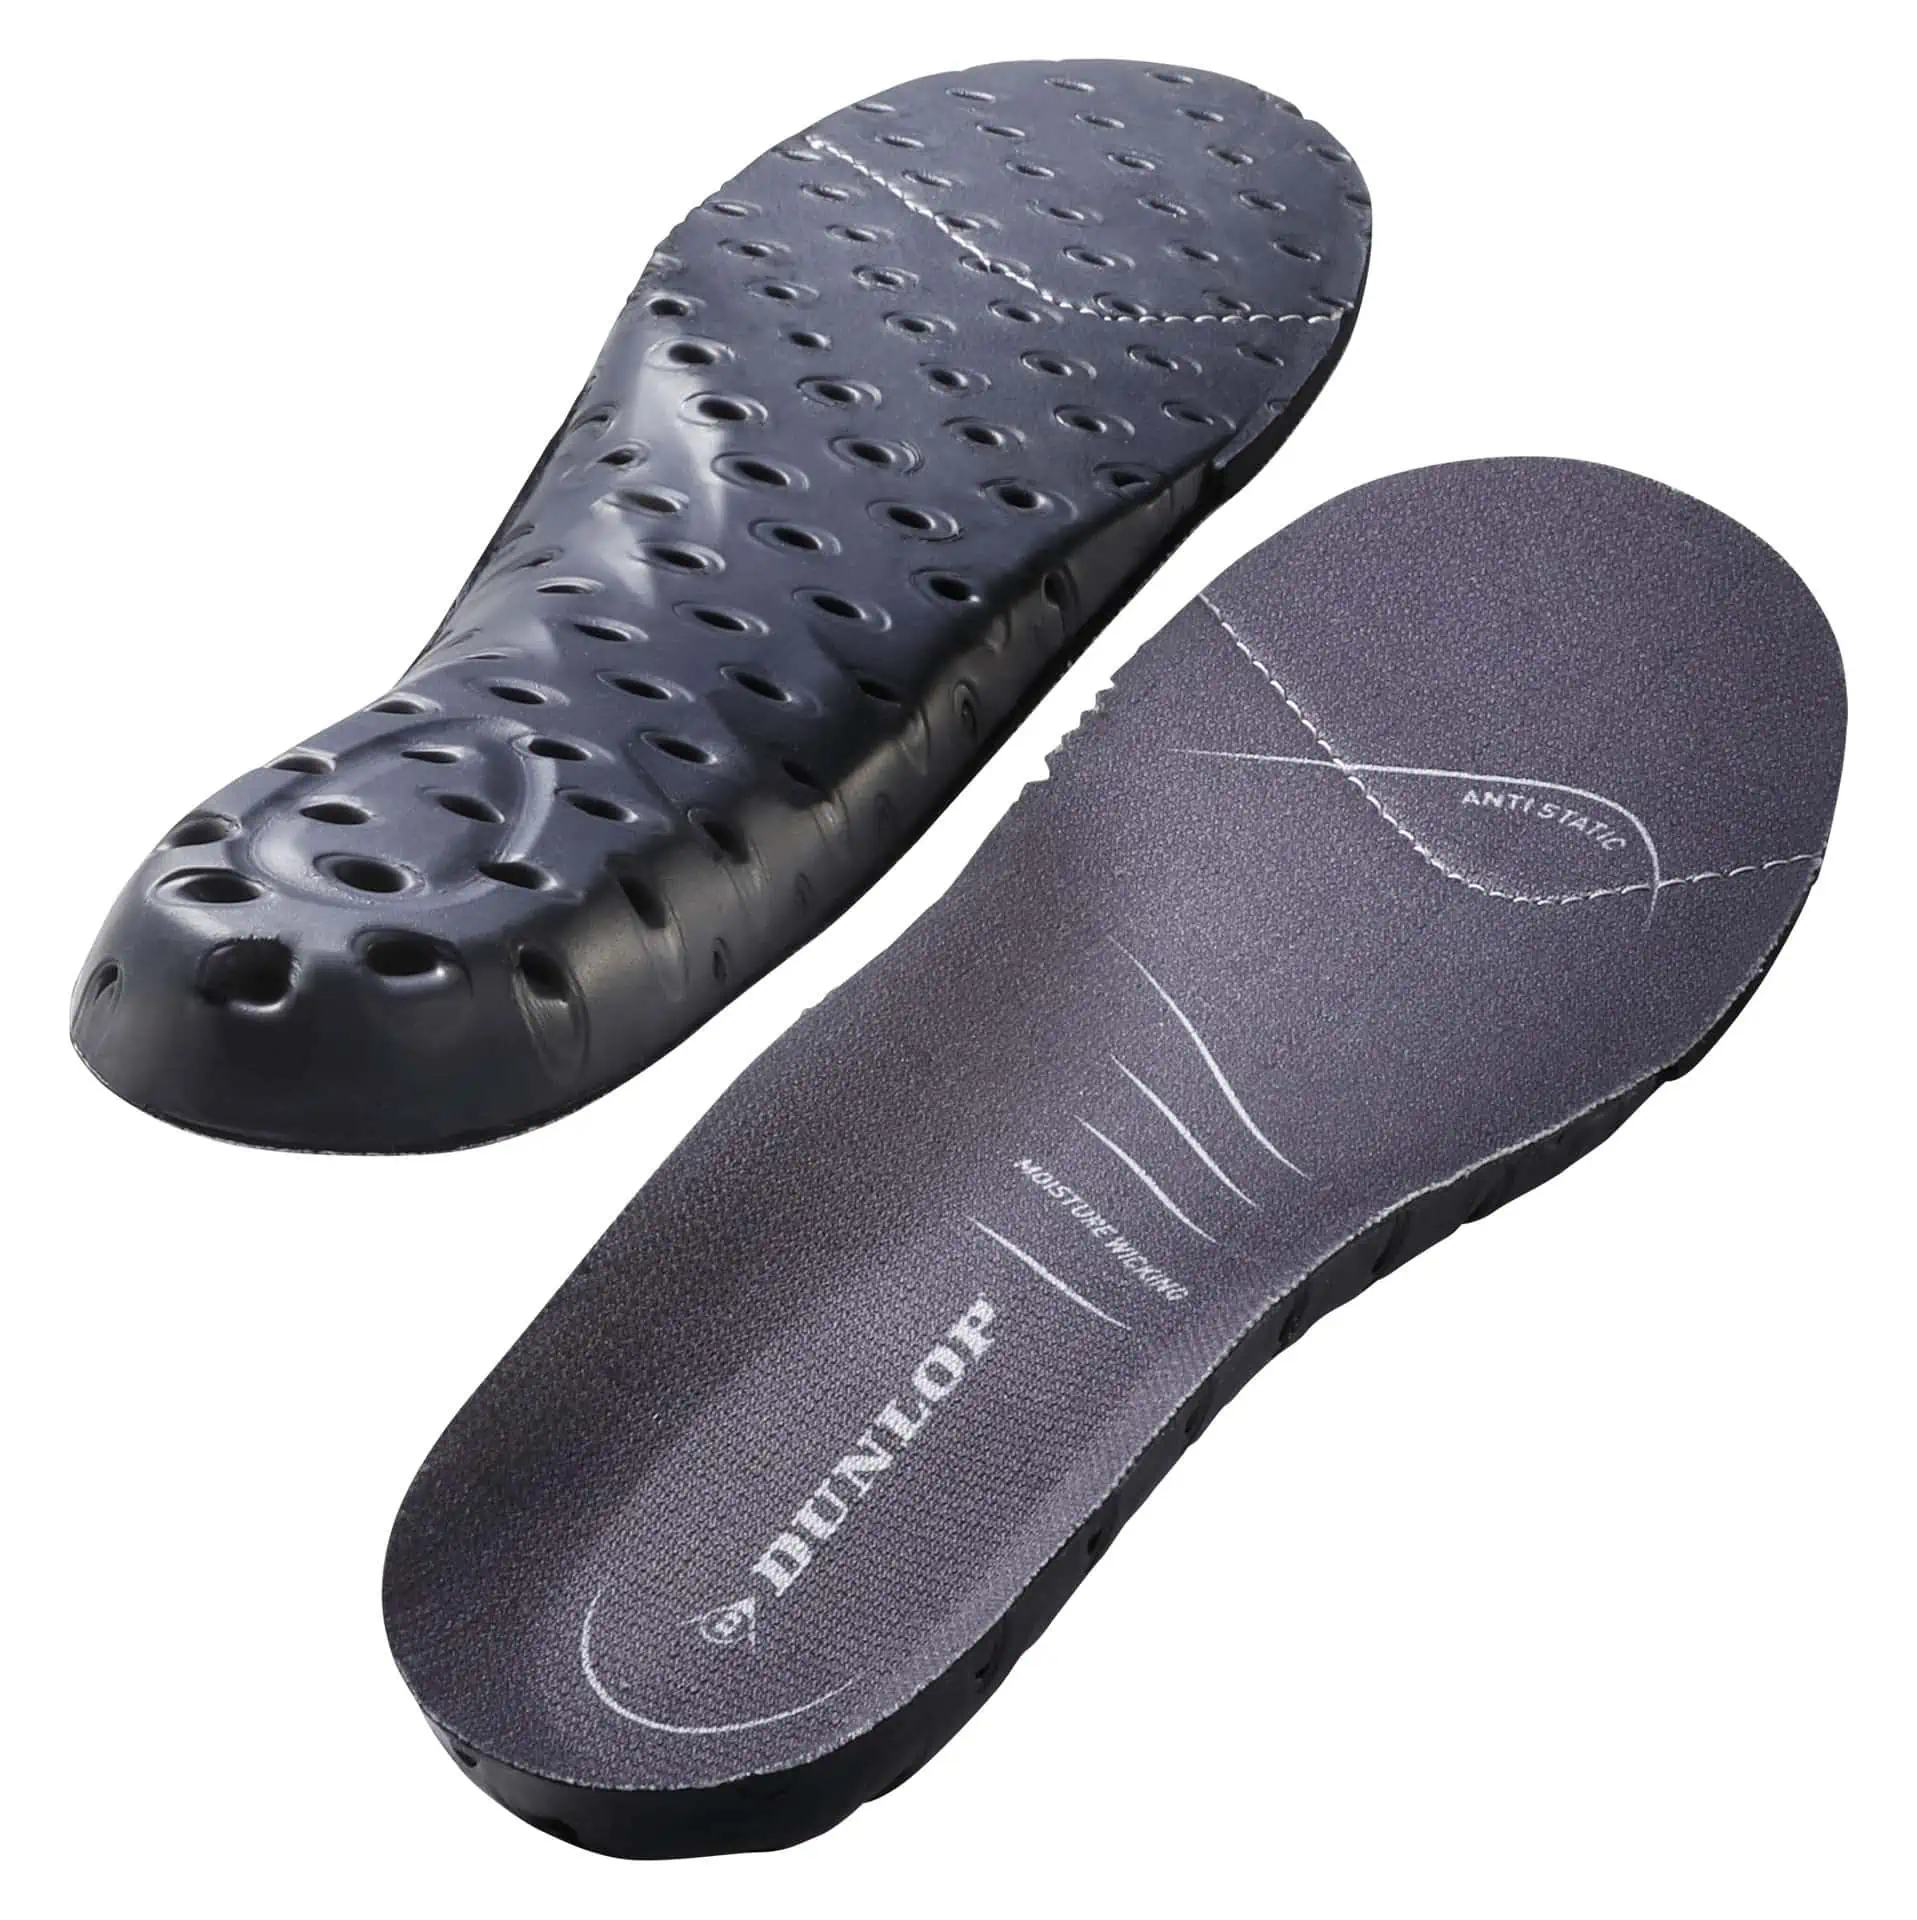 Insole Dunlop Comfort (for FieldPRO Boots)